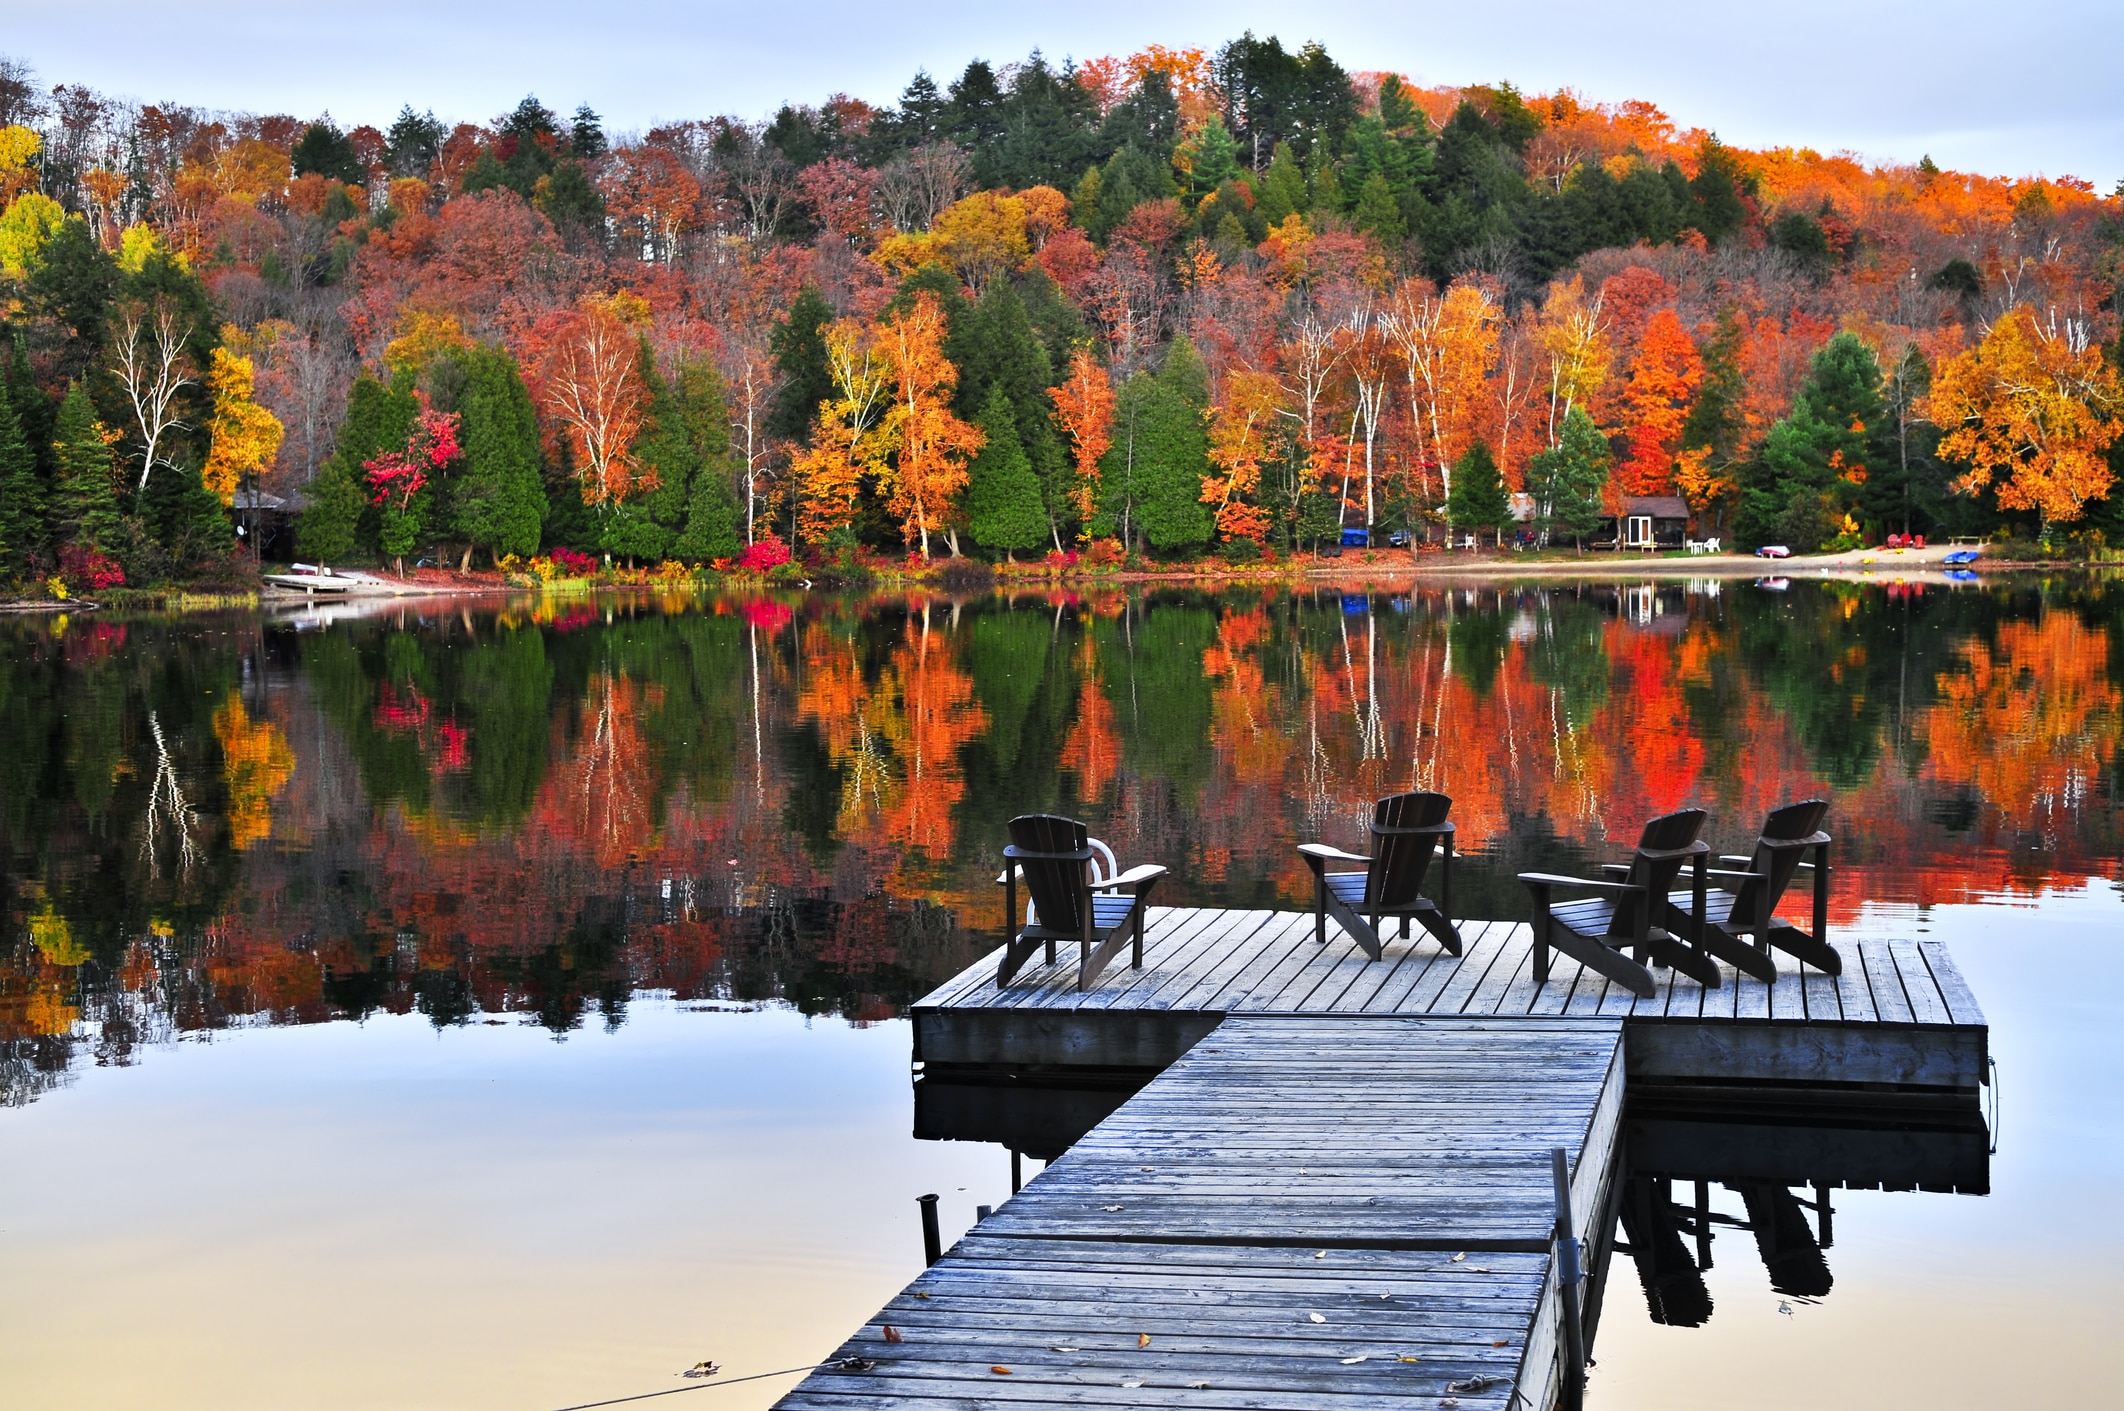 fall vacation ideas. Wooden dock with chairs on calm fall lake